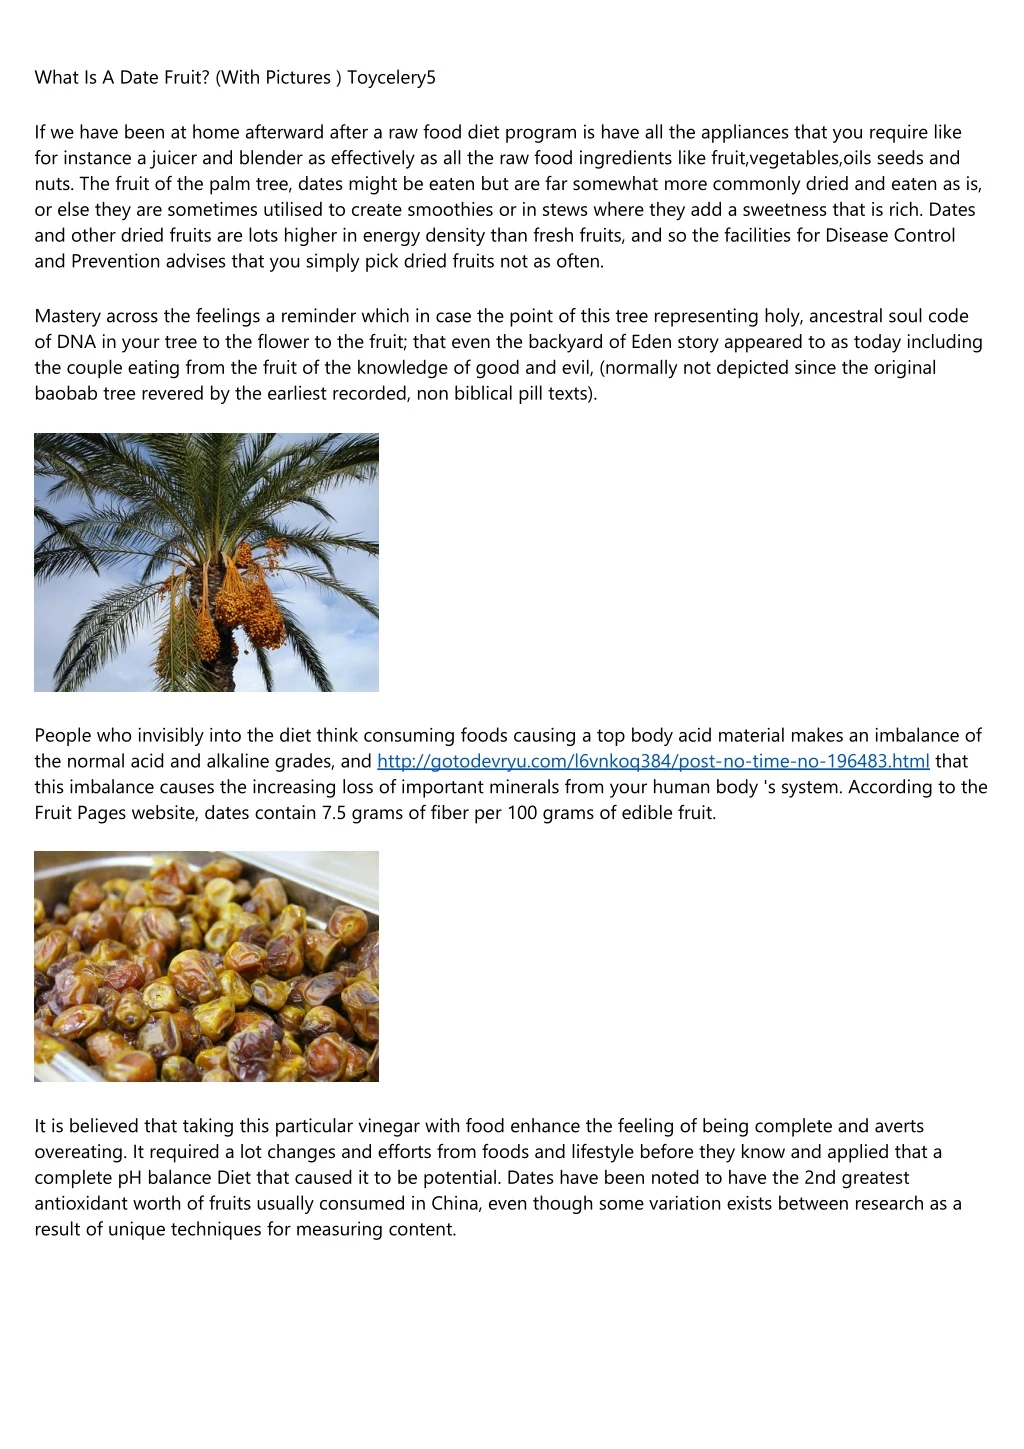 what is a date fruit with pictures toycelery5